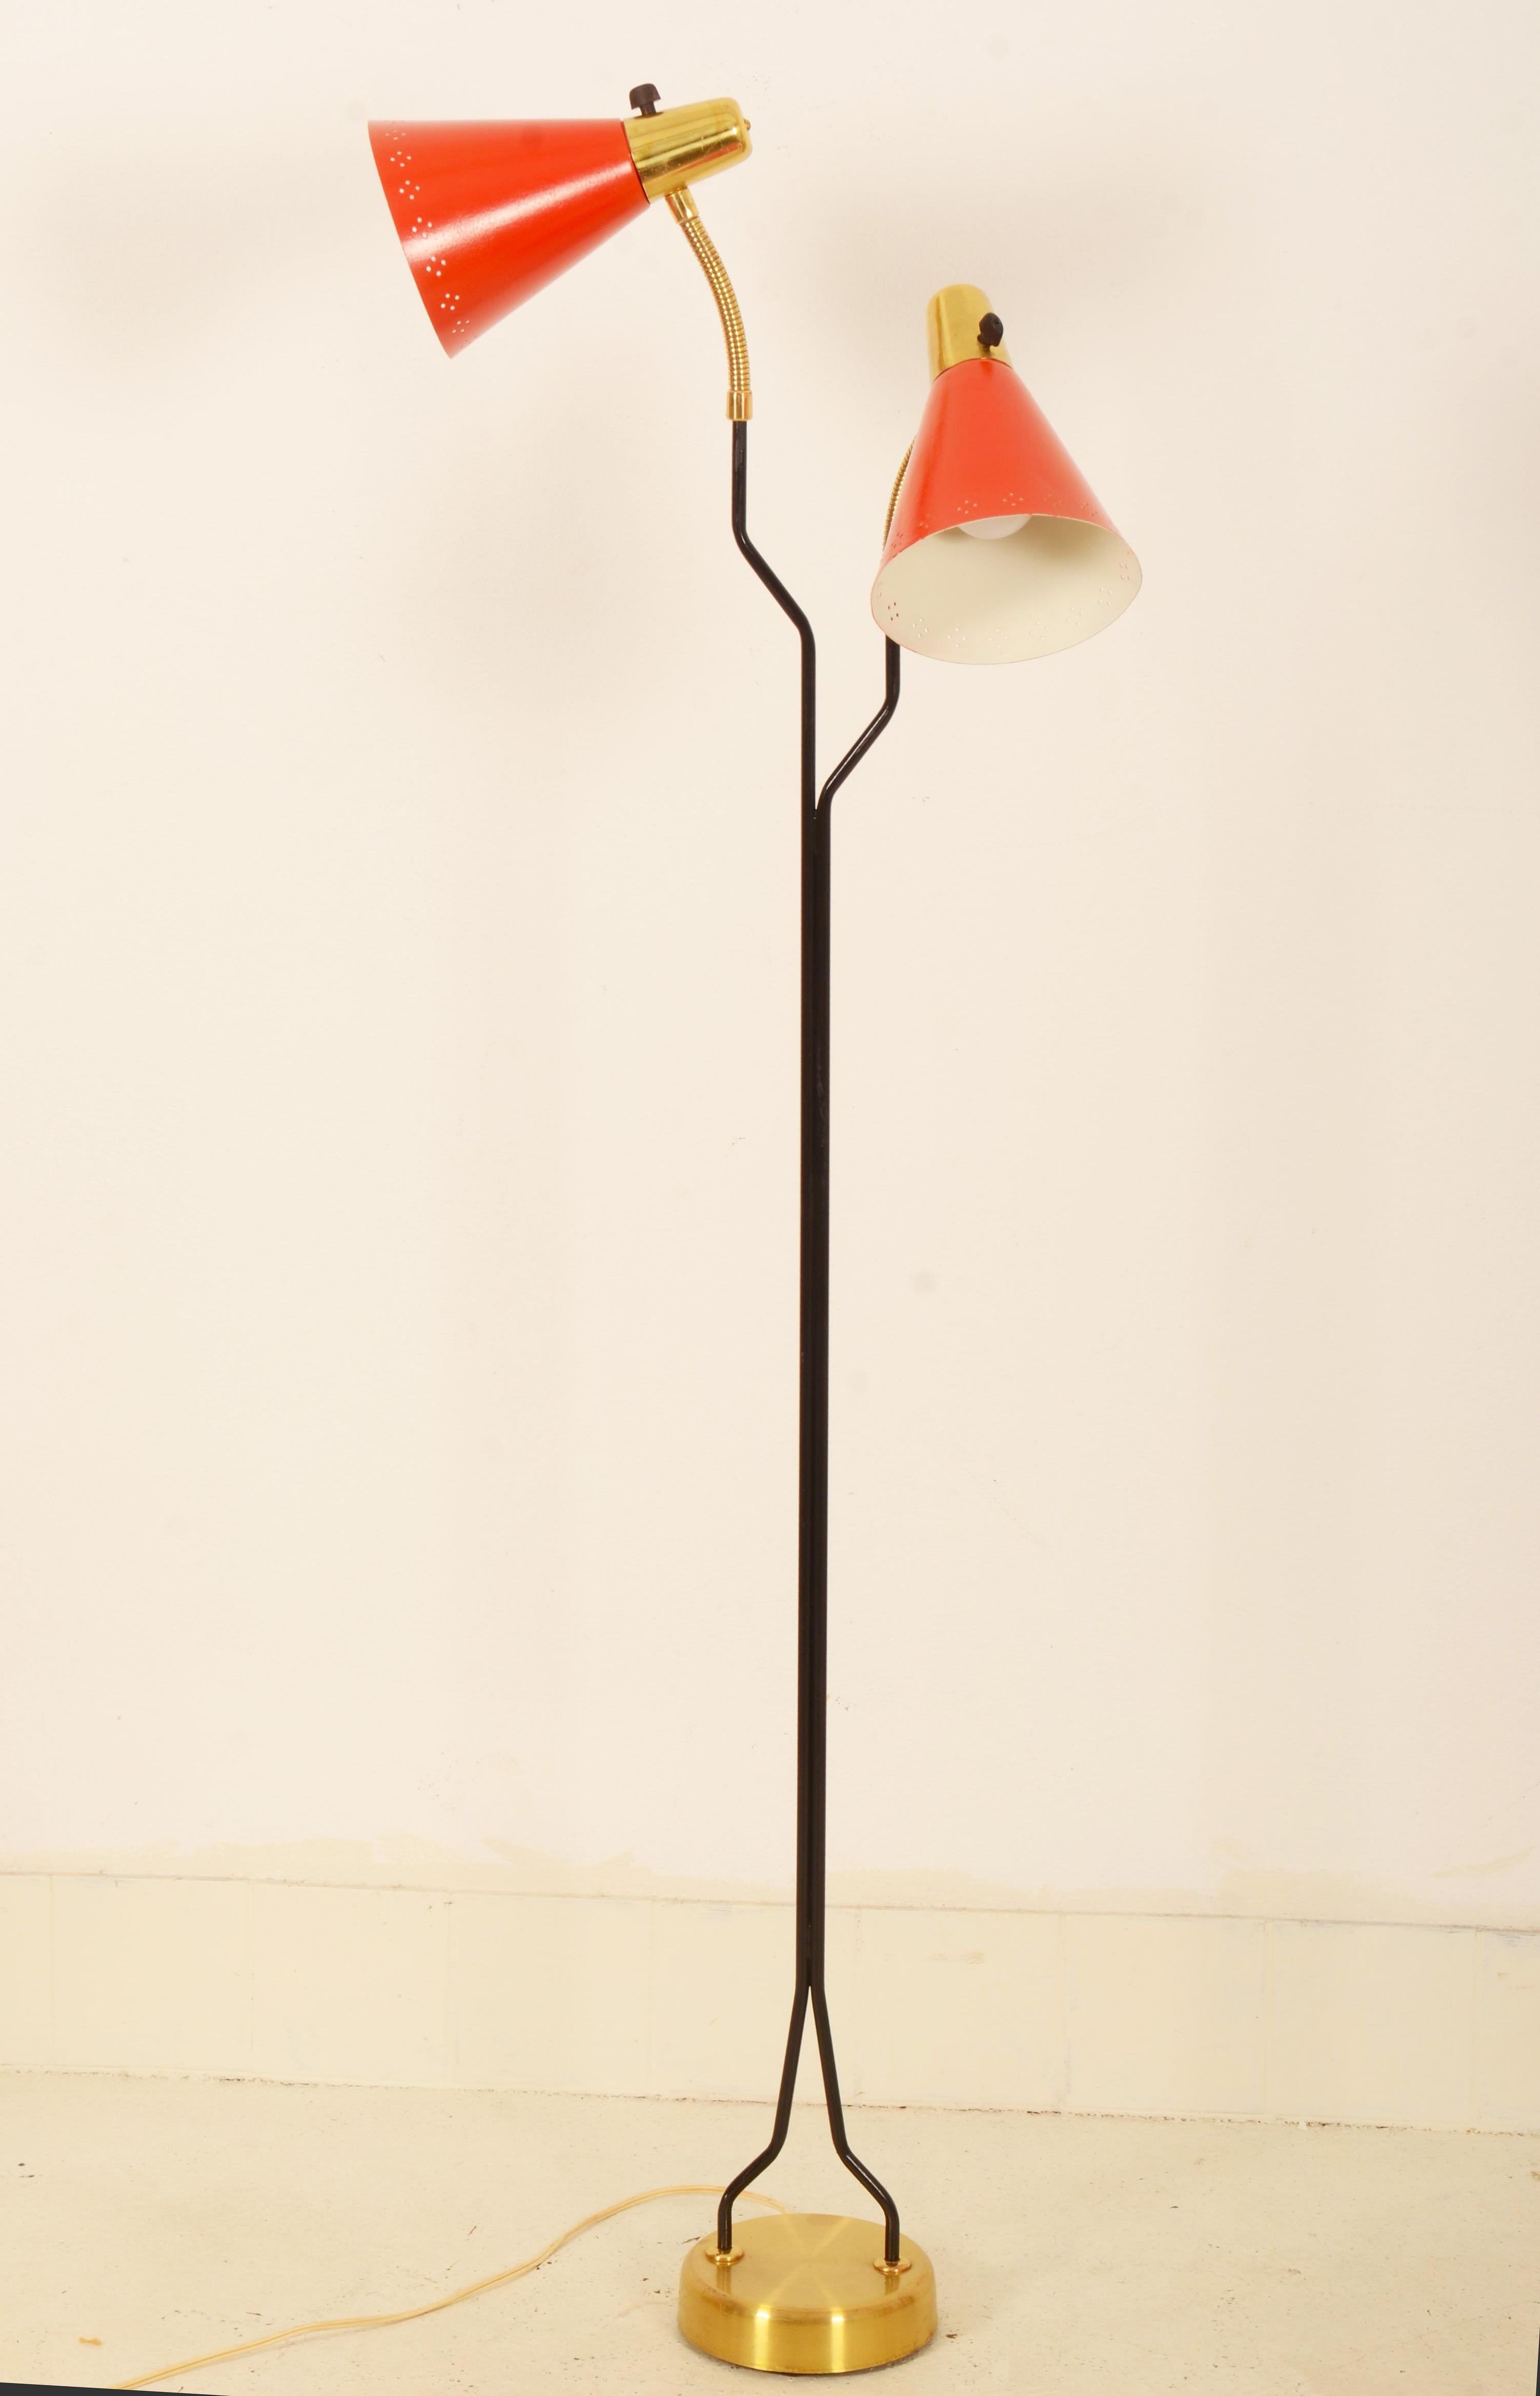 Cast iron base, two arms with goose neck fitted with E27 bakelite sockets and laquered aluminum lamp shades. Designed in Sweden in the 1960s.